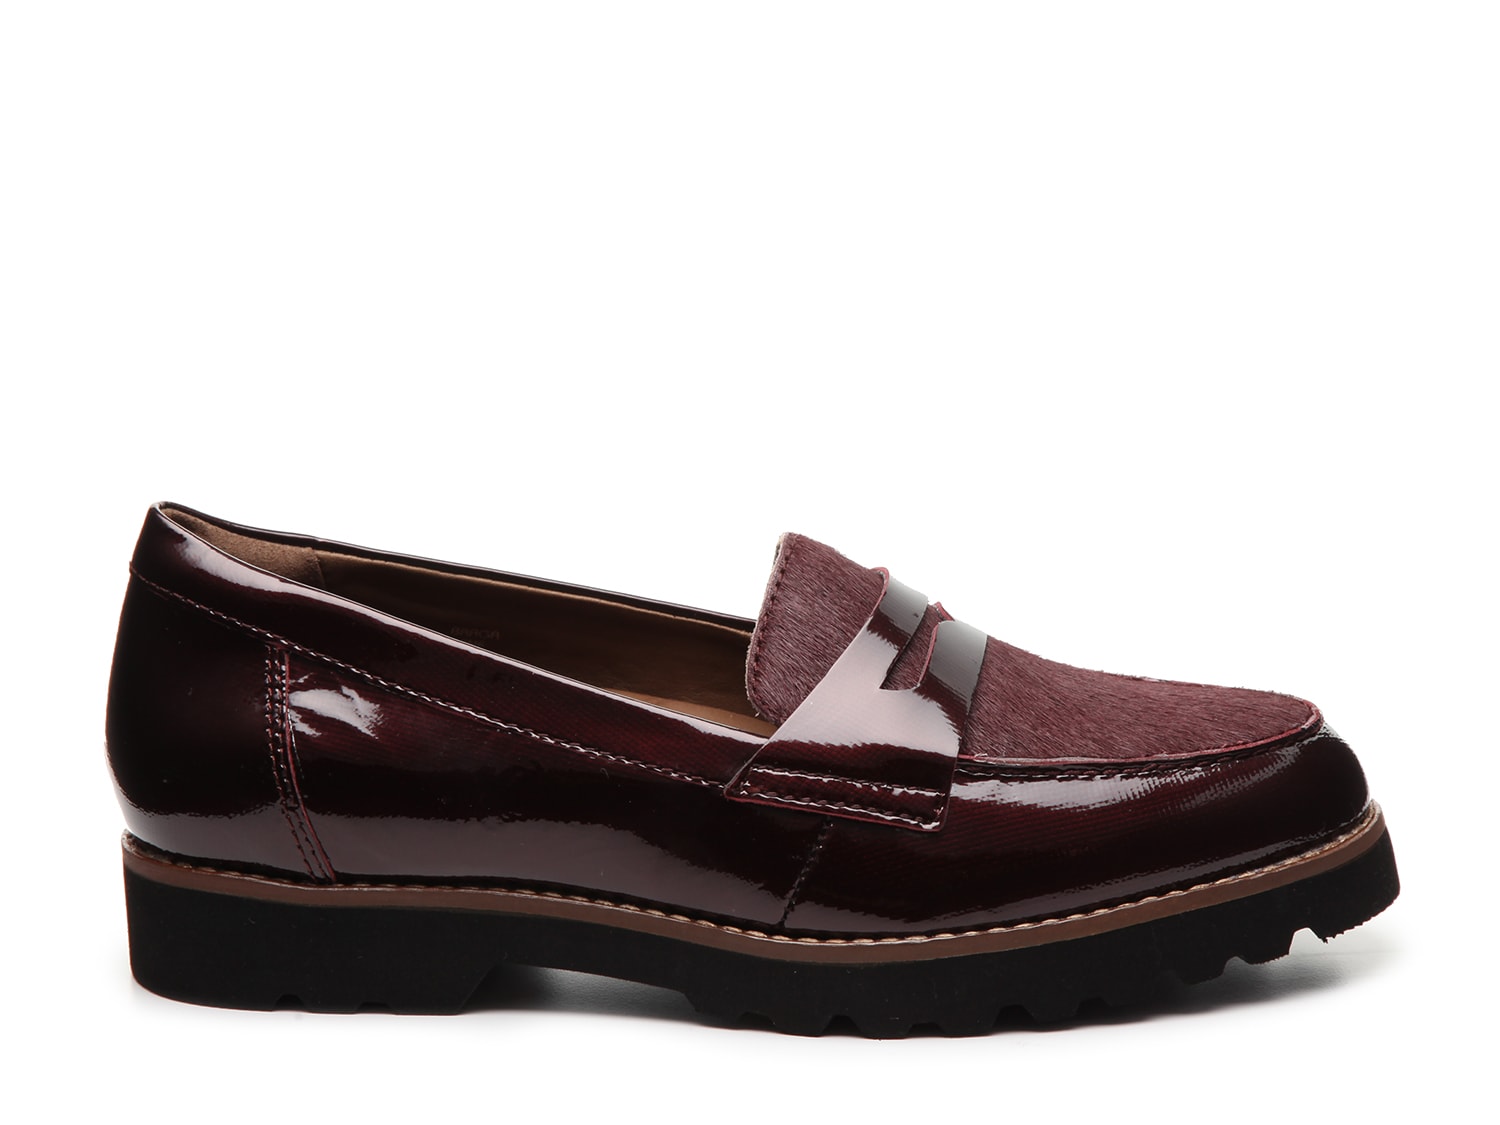 earthies braga loafers